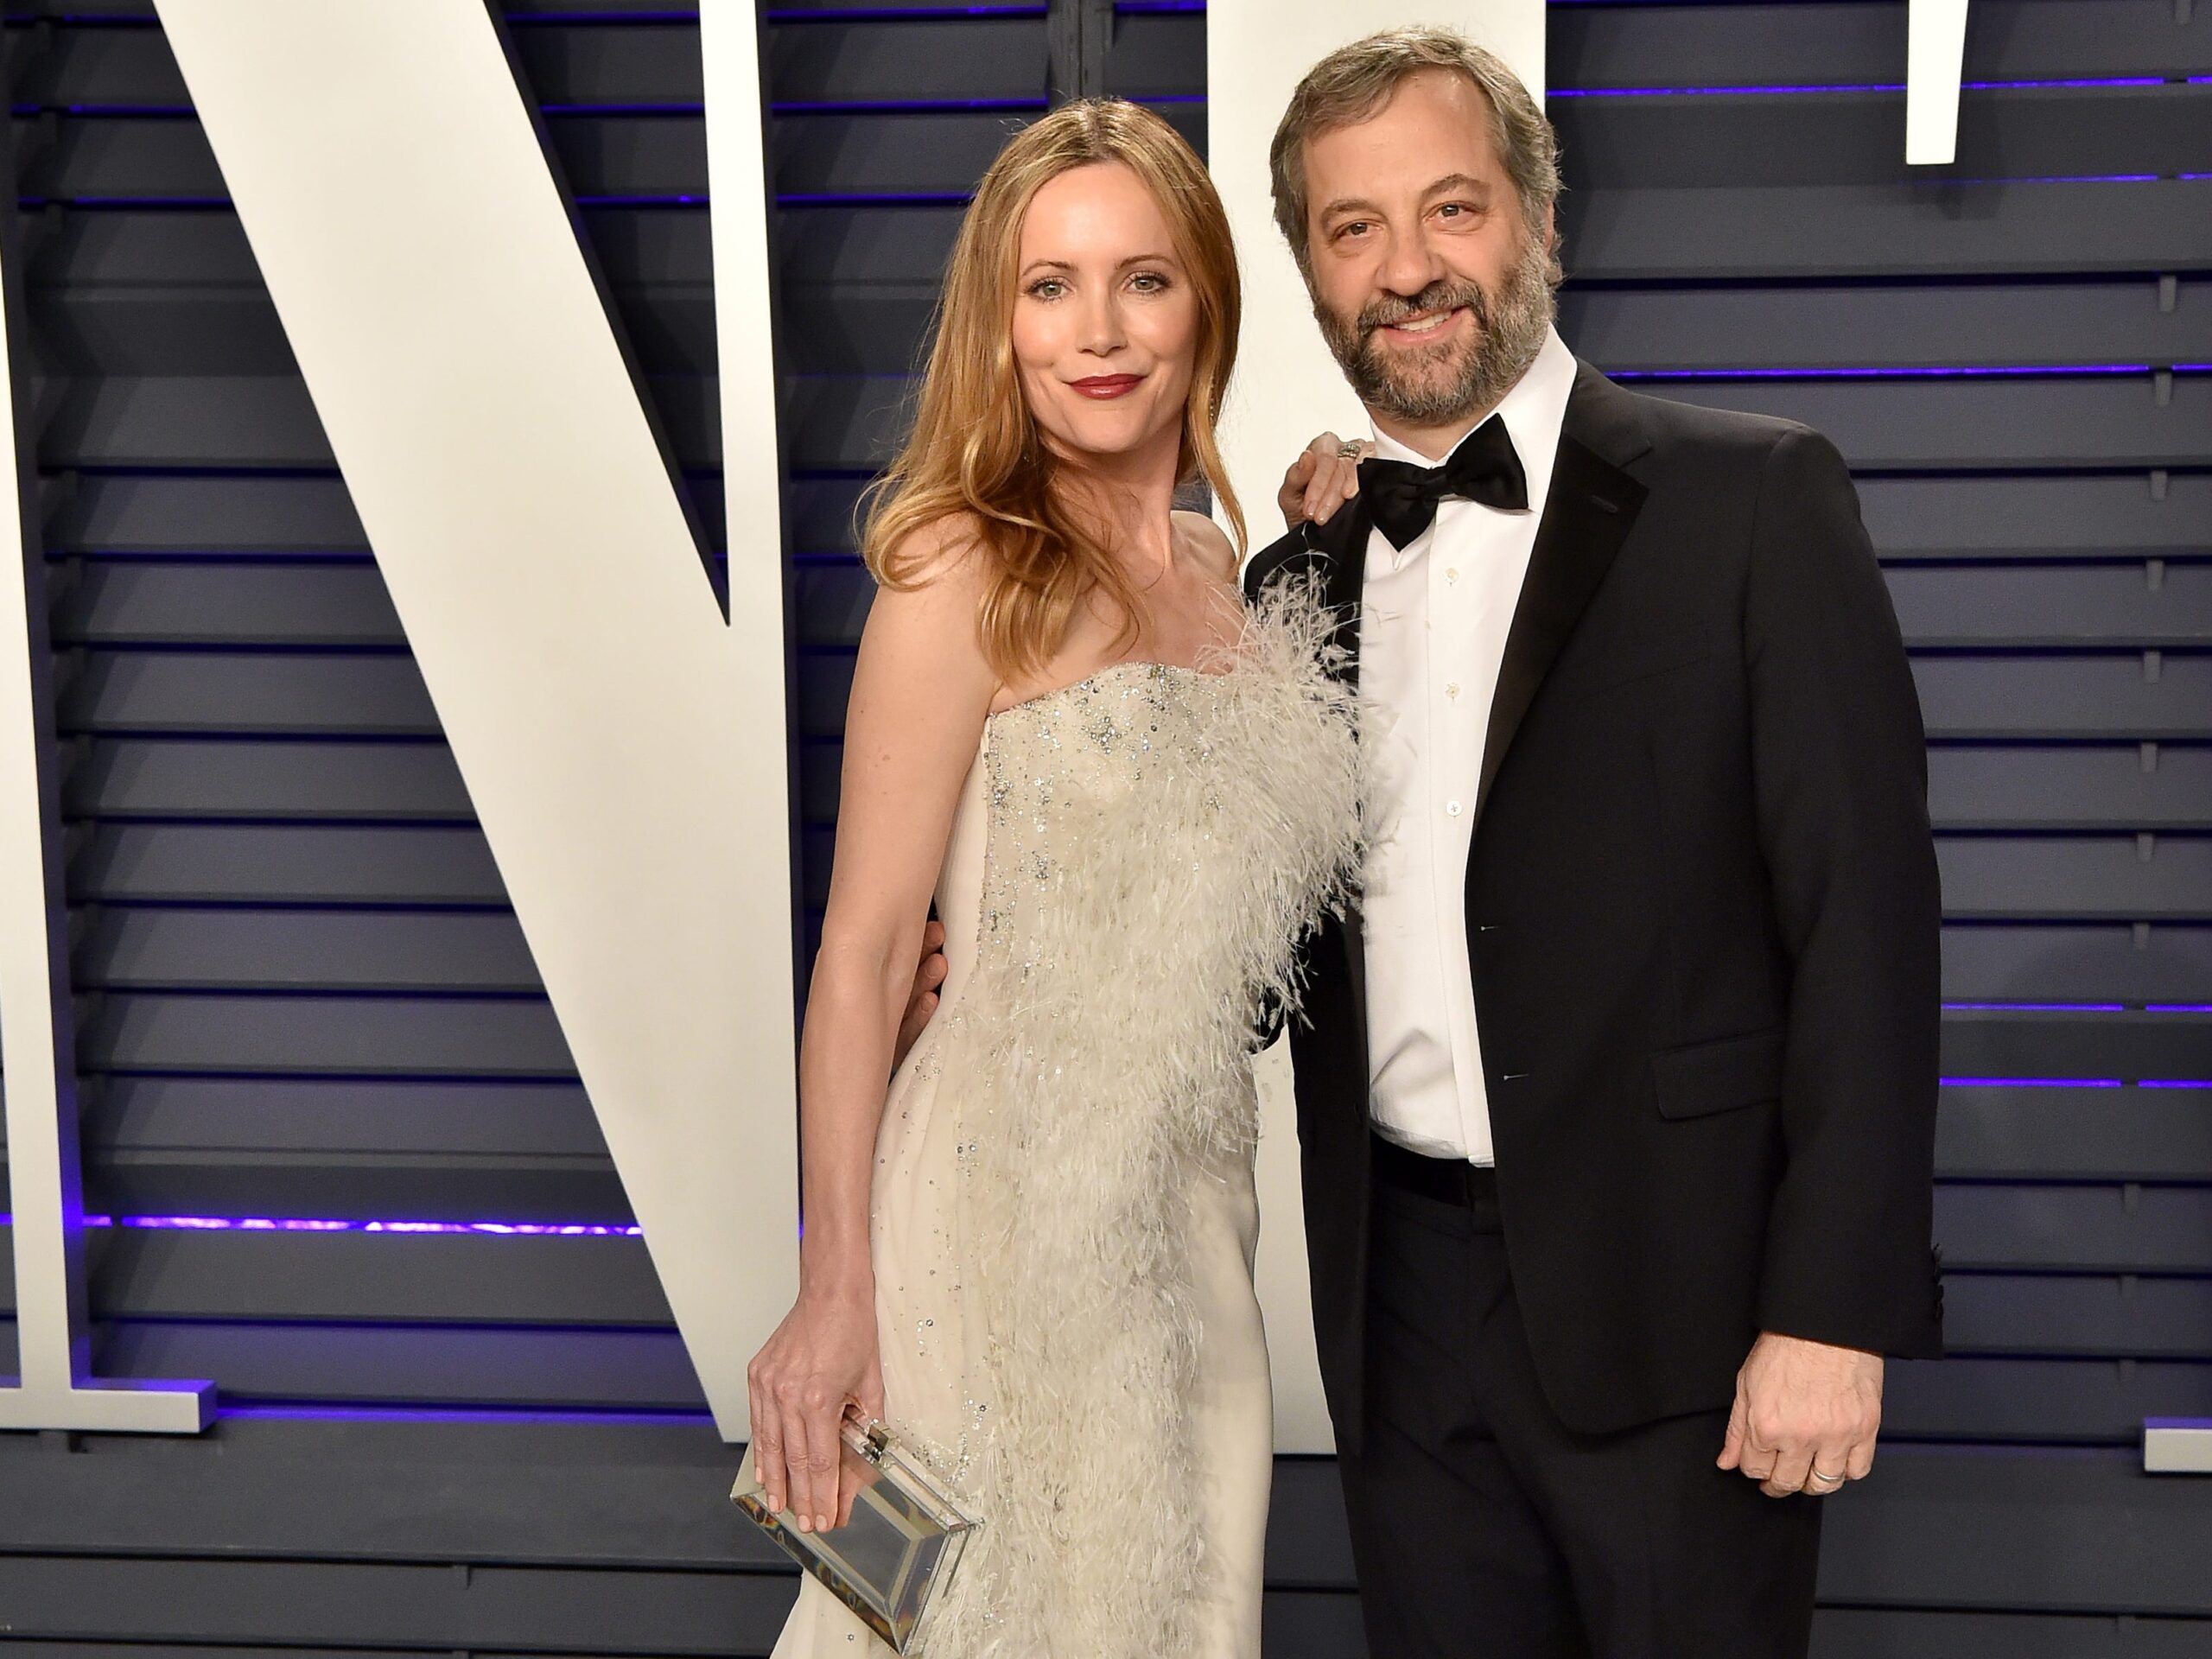 Leslie Mann and Judd Apatow attend the 2019 Vanity Fair Oscar Party.